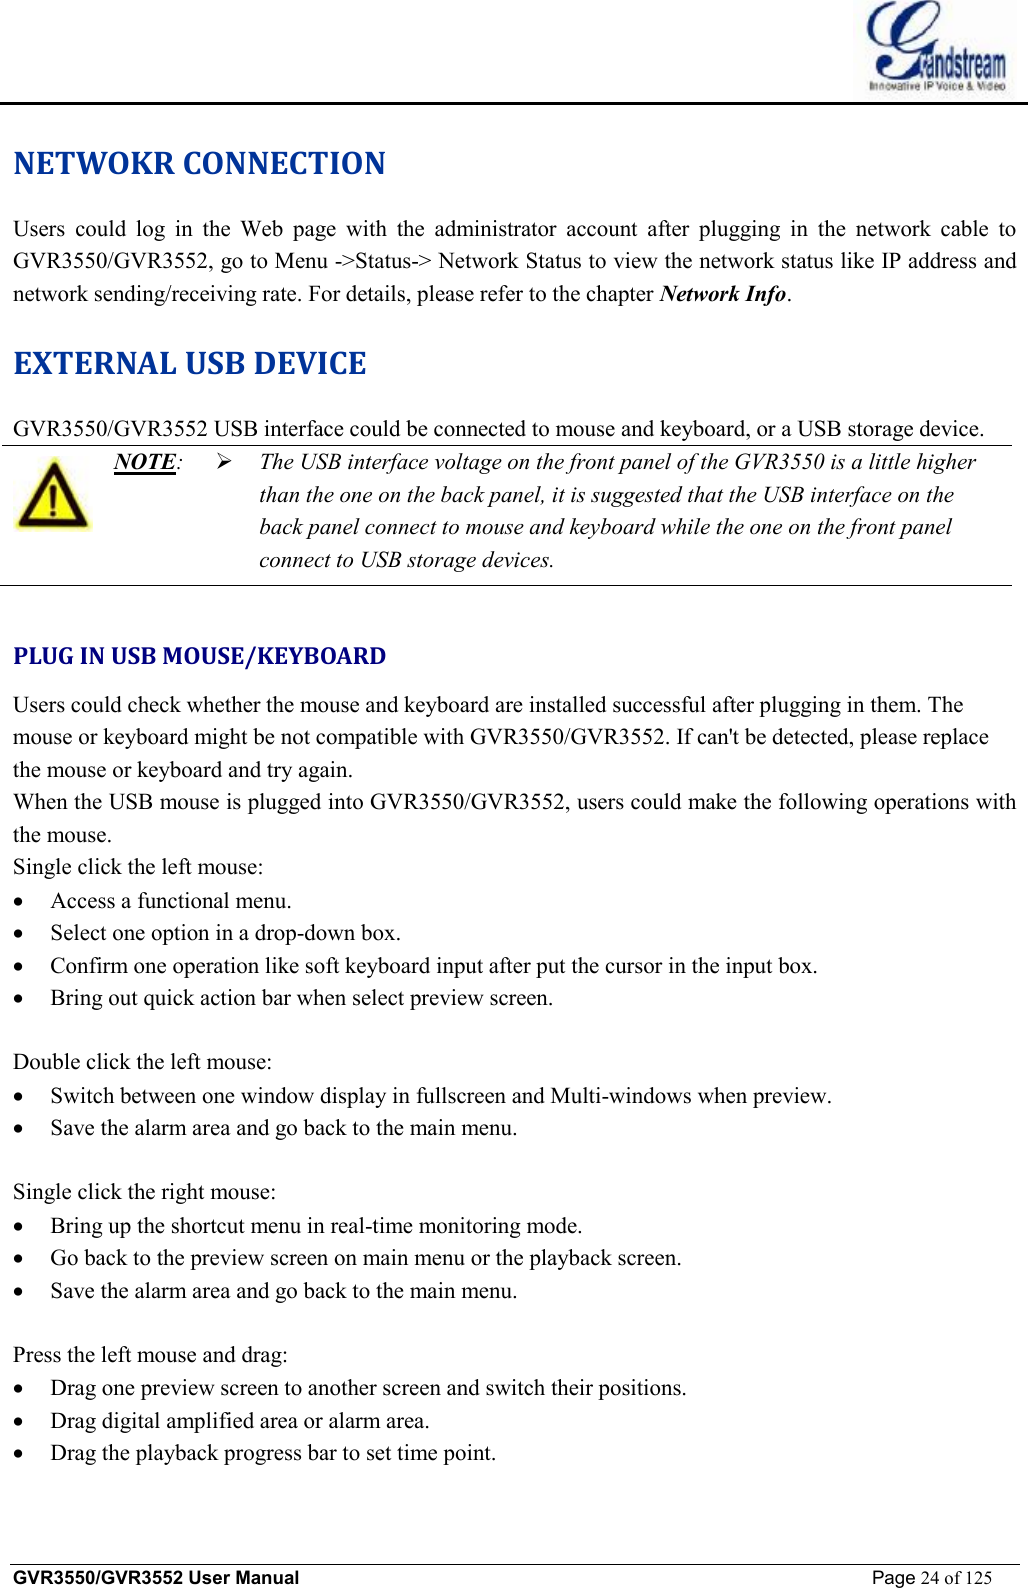    GVR3550/GVR3552 User Manual                                                             Page 24 of 125        NETWOKR CONNECTION Users could log in the Web page with the administrator account after plugging in the network cable to GVR3550/GVR3552, go to Menu -&gt;Status-&gt; Network Status to view the network status like IP address and network sending/receiving rate. For details, please refer to the chapter Network Info. EXTERNAL USB DEVICE GVR3550/GVR3552 USB interface could be connected to mouse and keyboard, or a USB storage device.  NOTE:  Ø The USB interface voltage on the front panel of the GVR3550 is a little higher than the one on the back panel, it is suggested that the USB interface on the back panel connect to mouse and keyboard while the one on the front panel connect to USB storage devices.   PLUG IN USB MOUSE/KEYBOARD Users could check whether the mouse and keyboard are installed successful after plugging in them. The mouse or keyboard might be not compatible with GVR3550/GVR3552. If can&apos;t be detected, please replace the mouse or keyboard and try again. When the USB mouse is plugged into GVR3550/GVR3552, users could make the following operations with the mouse. Single click the left mouse: · Access a functional menu. · Select one option in a drop-down box. · Confirm one operation like soft keyboard input after put the cursor in the input box. · Bring out quick action bar when select preview screen.  Double click the left mouse: · Switch between one window display in fullscreen and Multi-windows when preview. · Save the alarm area and go back to the main menu.   Single click the right mouse: · Bring up the shortcut menu in real-time monitoring mode. · Go back to the preview screen on main menu or the playback screen. · Save the alarm area and go back to the main menu.  Press the left mouse and drag: · Drag one preview screen to another screen and switch their positions. · Drag digital amplified area or alarm area. · Drag the playback progress bar to set time point. 